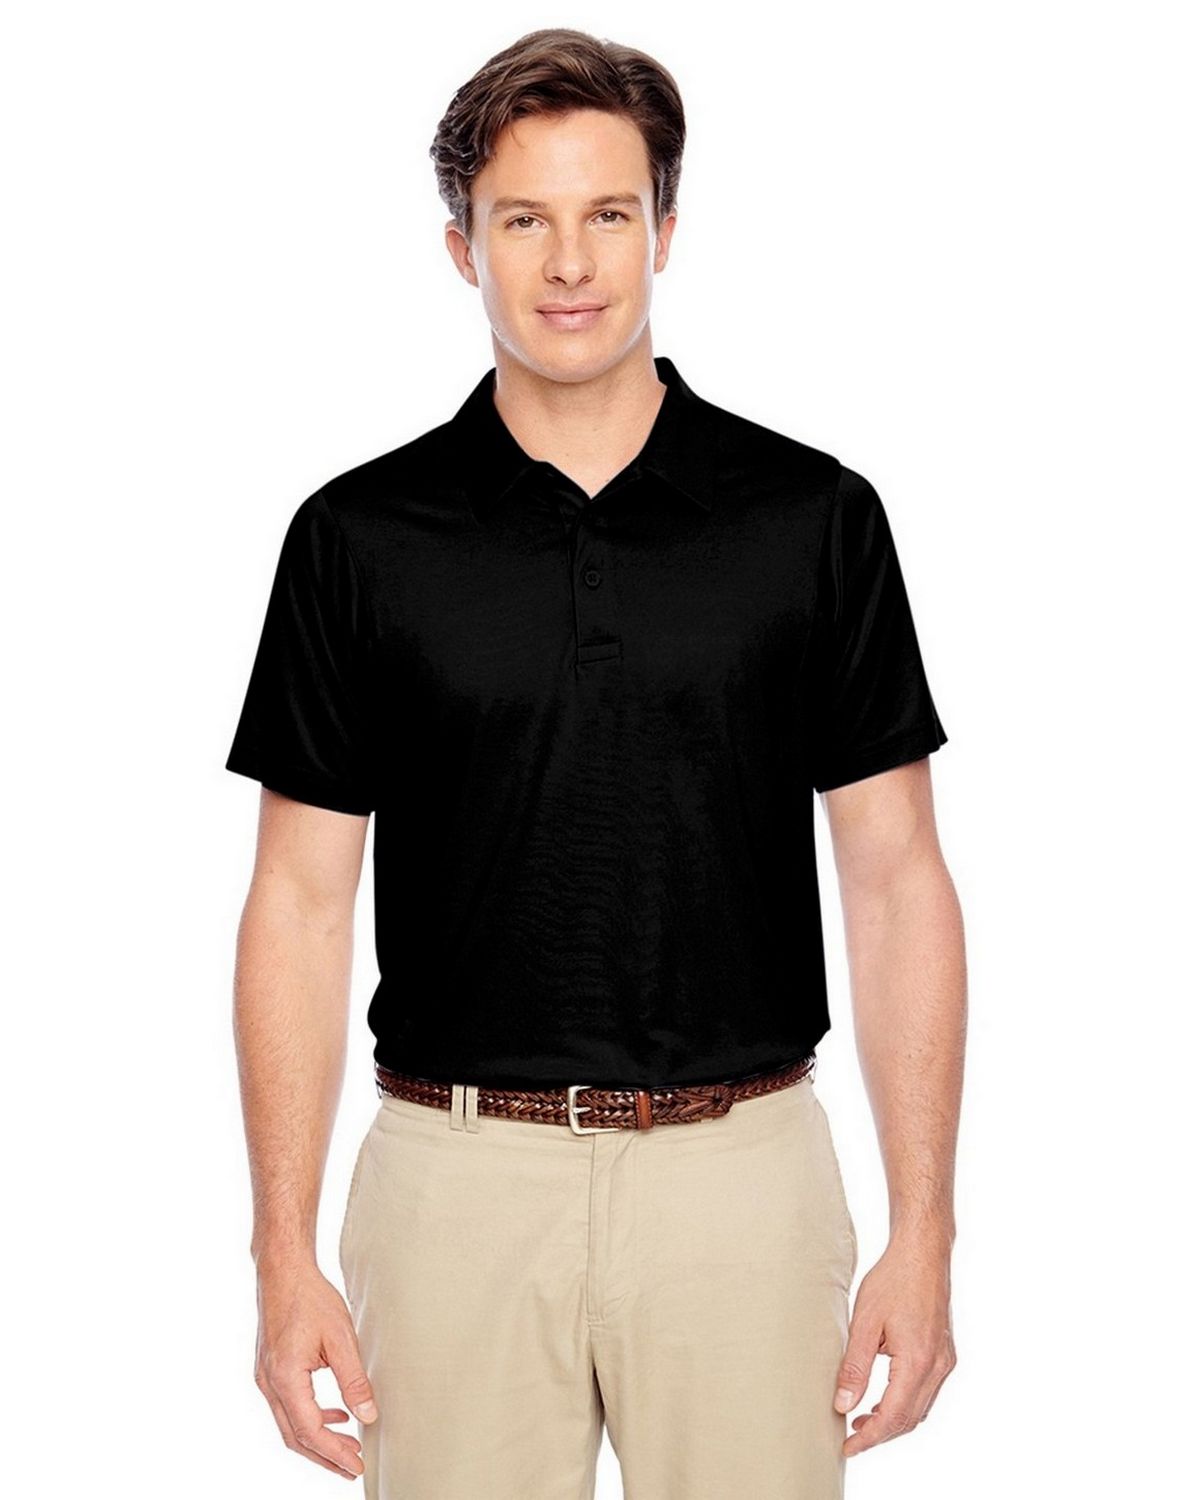 Under Armour Golf Polo Size Chart